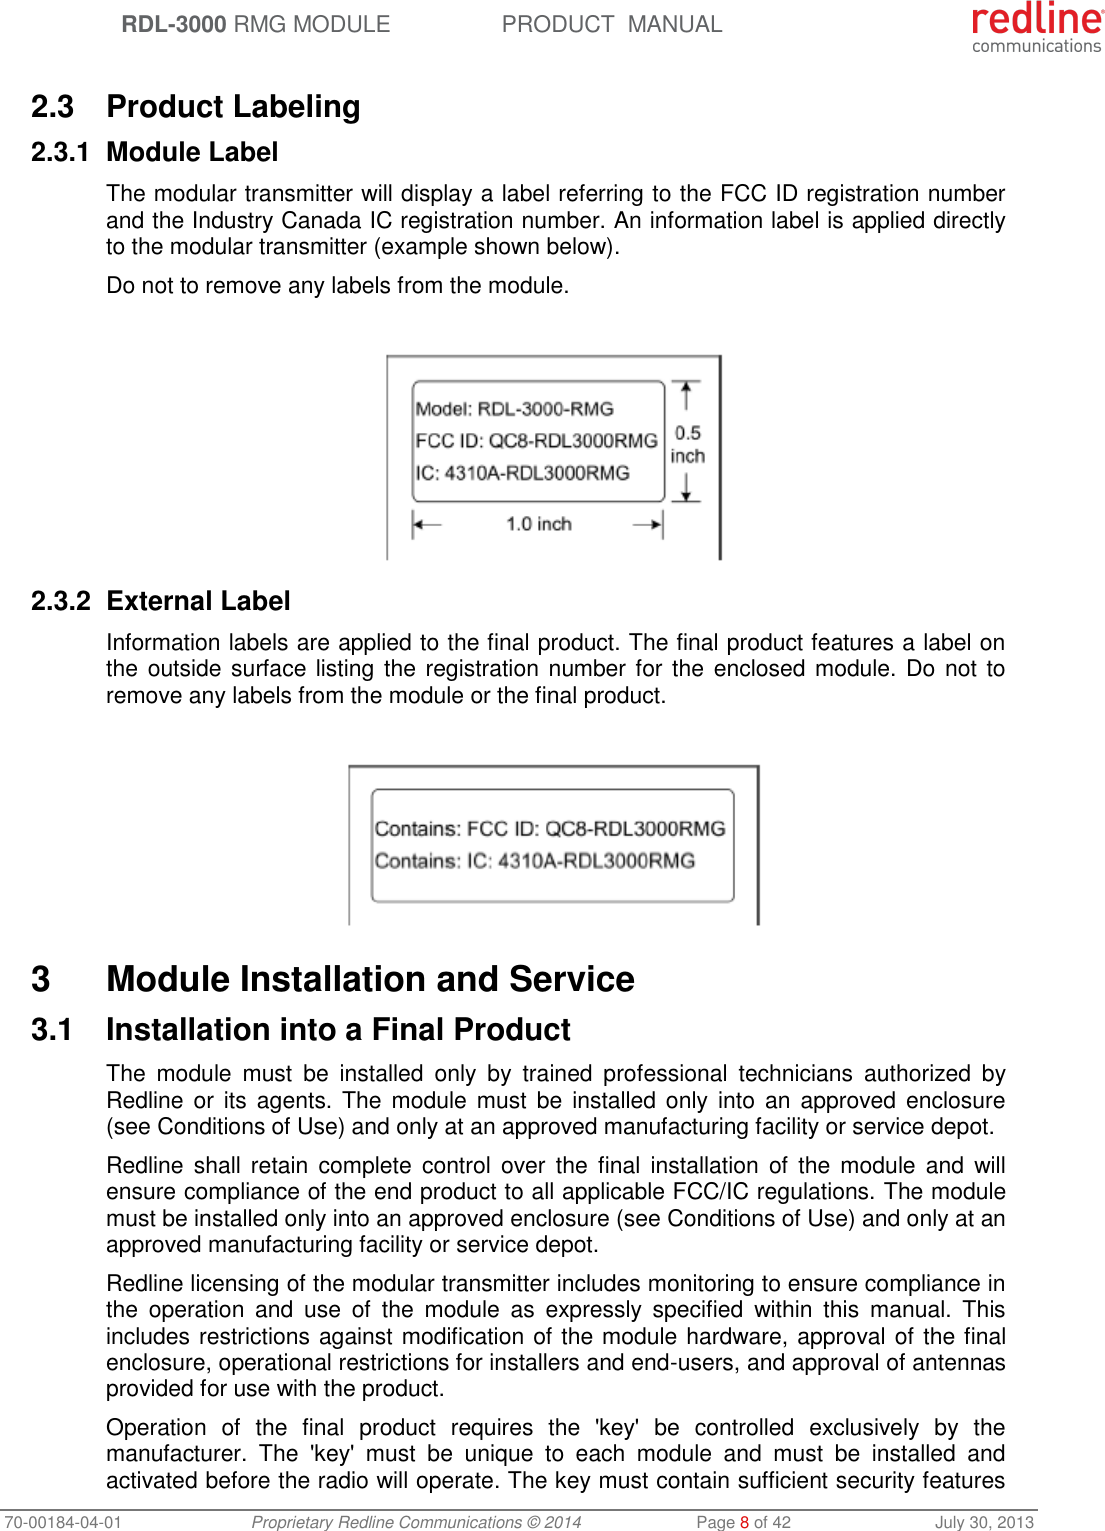  RDL-3000 RMG MODULE PRODUCT  MANUAL 70-00184-04-01 Proprietary Redline Communications © 2014  Page 8 of 42  July 30, 2013  2.3  Product Labeling 2.3.1  Module Label The modular transmitter will display a label referring to the FCC ID registration number and the Industry Canada IC registration number. An information label is applied directly to the modular transmitter (example shown below). Do not to remove any labels from the module.   2.3.2  External Label Information labels are applied to the final product. The final product features a label on the outside surface listing the registration number for the  enclosed module. Do not to remove any labels from the module or the final product.    3  Module Installation and Service 3.1  Installation into a Final Product The  module  must  be  installed  only  by  trained  professional  technicians  authorized  by Redline or  its  agents. The  module must  be  installed only  into  an  approved enclosure (see Conditions of Use) and only at an approved manufacturing facility or service depot. Redline shall  retain  complete  control  over  the  final installation  of  the  module  and  will ensure compliance of the end product to all applicable FCC/IC regulations. The module must be installed only into an approved enclosure (see Conditions of Use) and only at an approved manufacturing facility or service depot. Redline licensing of the modular transmitter includes monitoring to ensure compliance in the  operation  and  use  of  the  module  as  expressly  specified  within  this  manual.  This includes restrictions against modification of the module hardware, approval of the final enclosure, operational restrictions for installers and end-users, and approval of antennas provided for use with the product. Operation  of  the  final  product  requires  the  &apos;key&apos;  be  controlled  exclusively  by  the manufacturer.  The  &apos;key&apos;  must  be  unique  to  each  module  and  must  be  installed  and activated before the radio will operate. The key must contain sufficient security features 